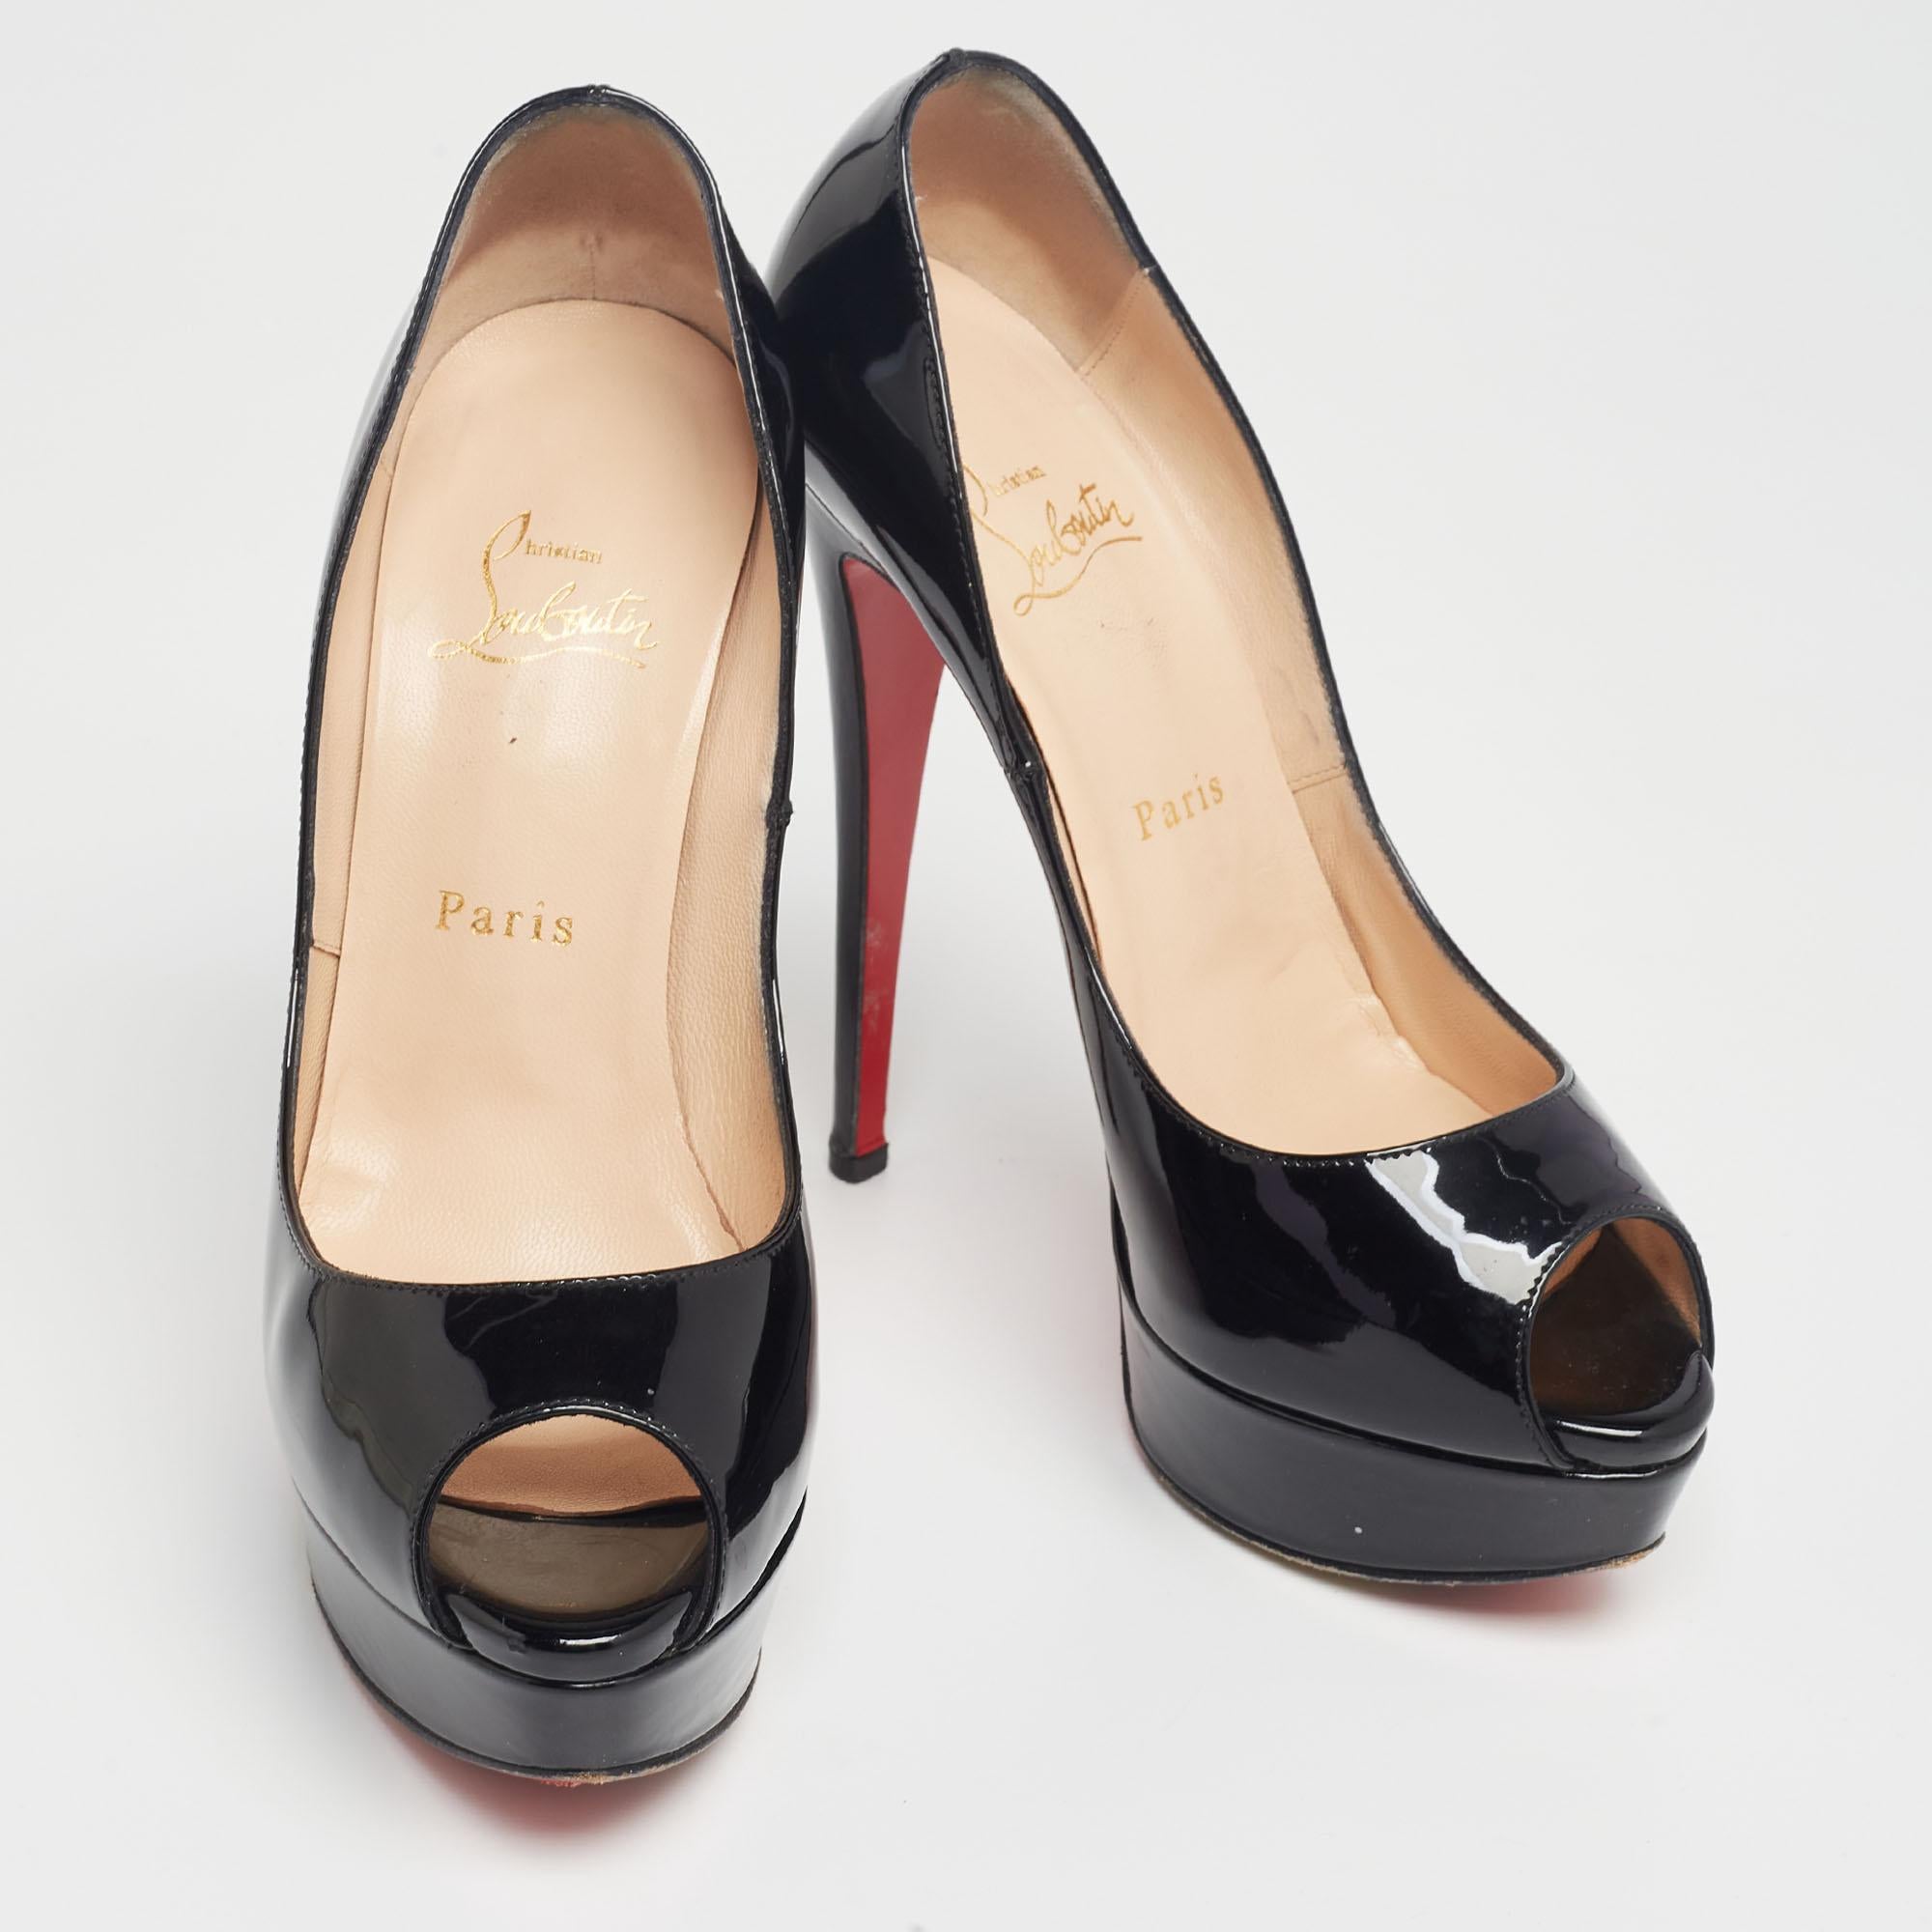 Christian Louboutin Black Patent Leather Lady Peep-Toe Pumps Size 38 For Sale 1